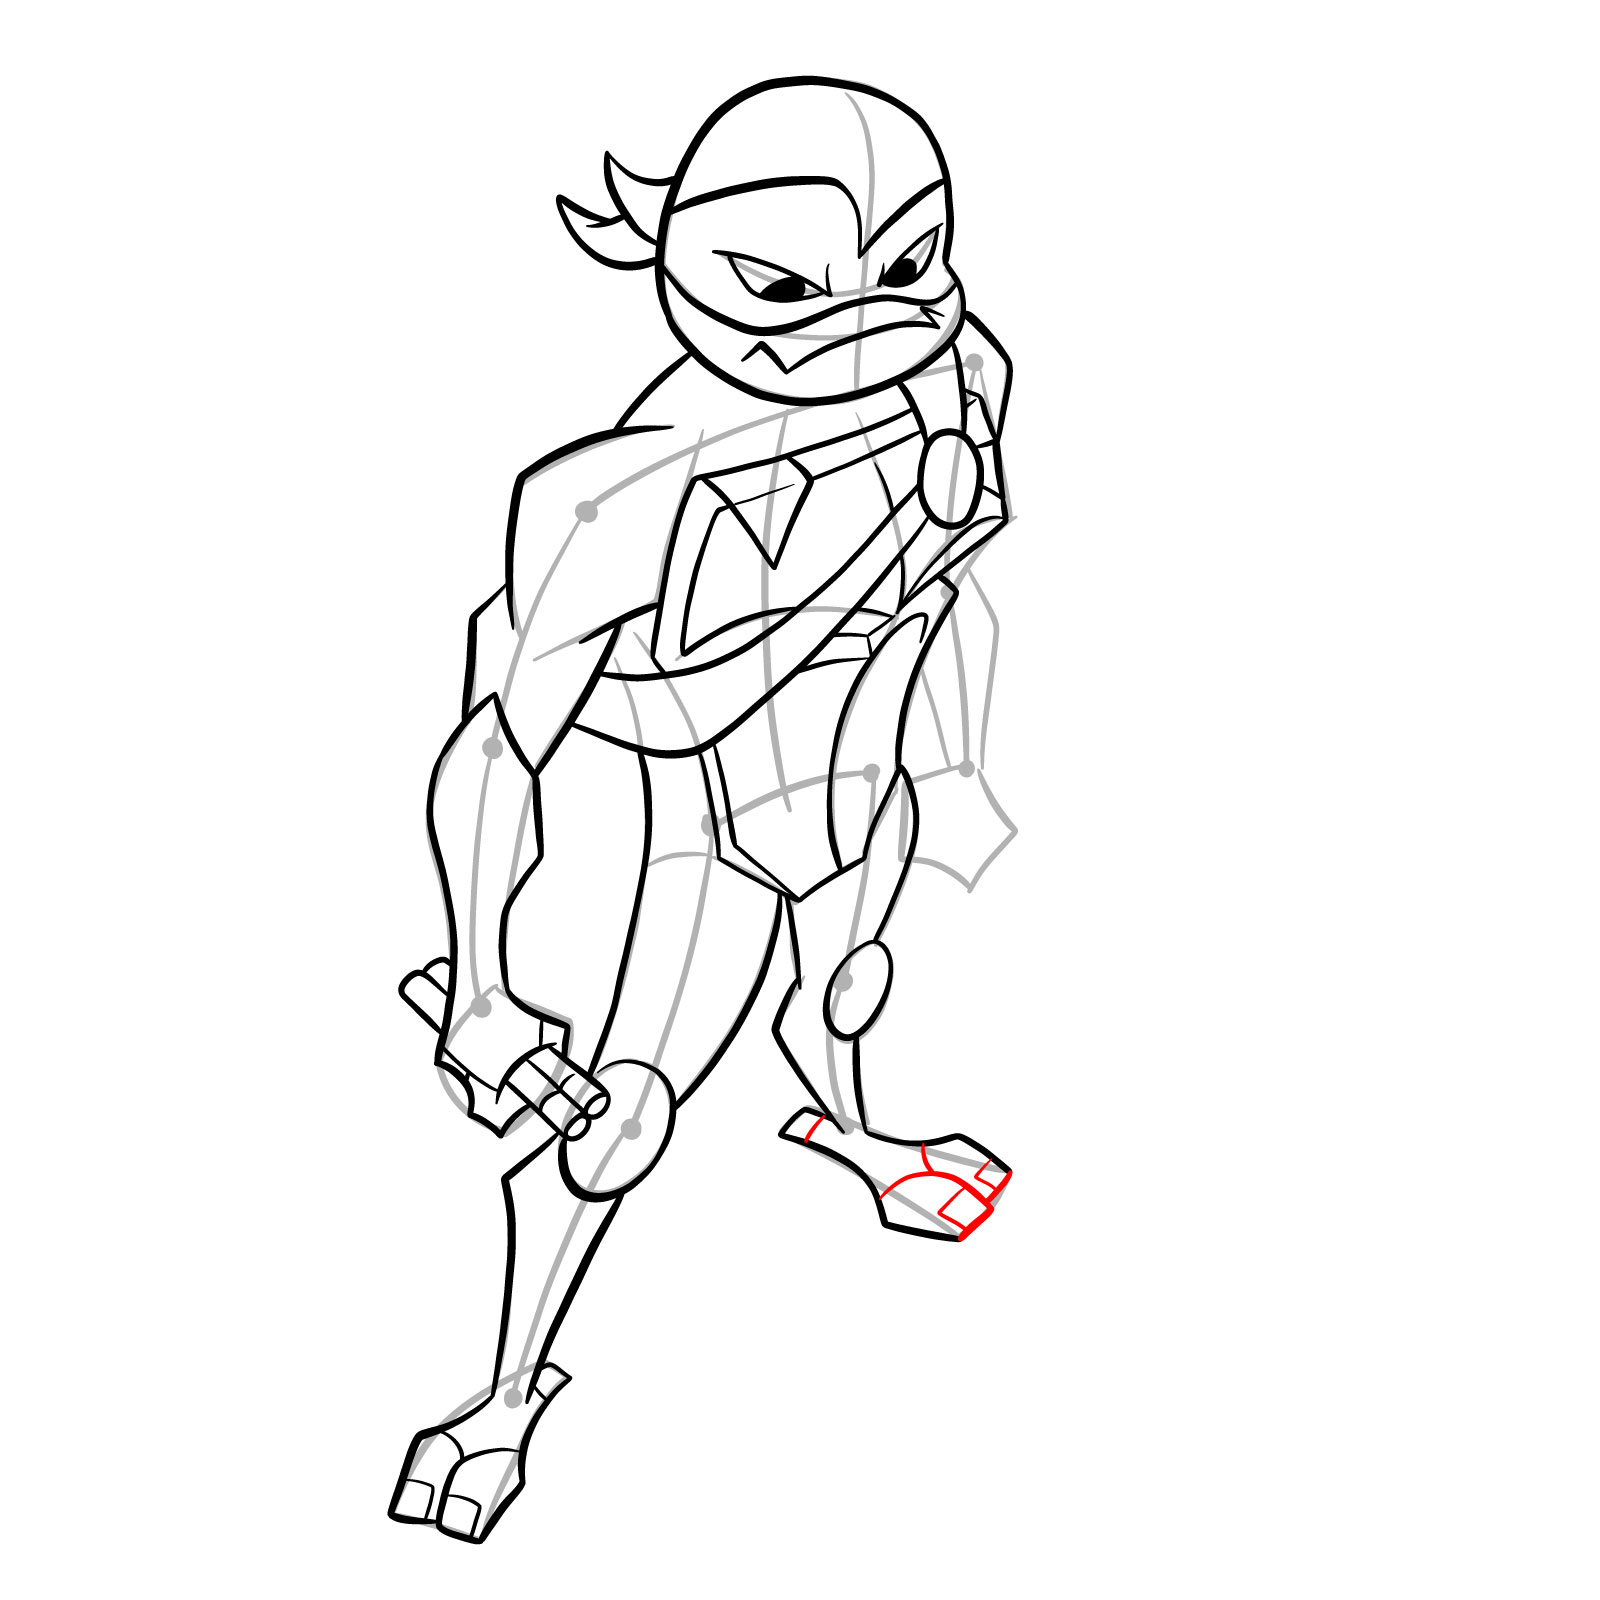 How to draw Mikey in Hamato Ninpō state - step 29